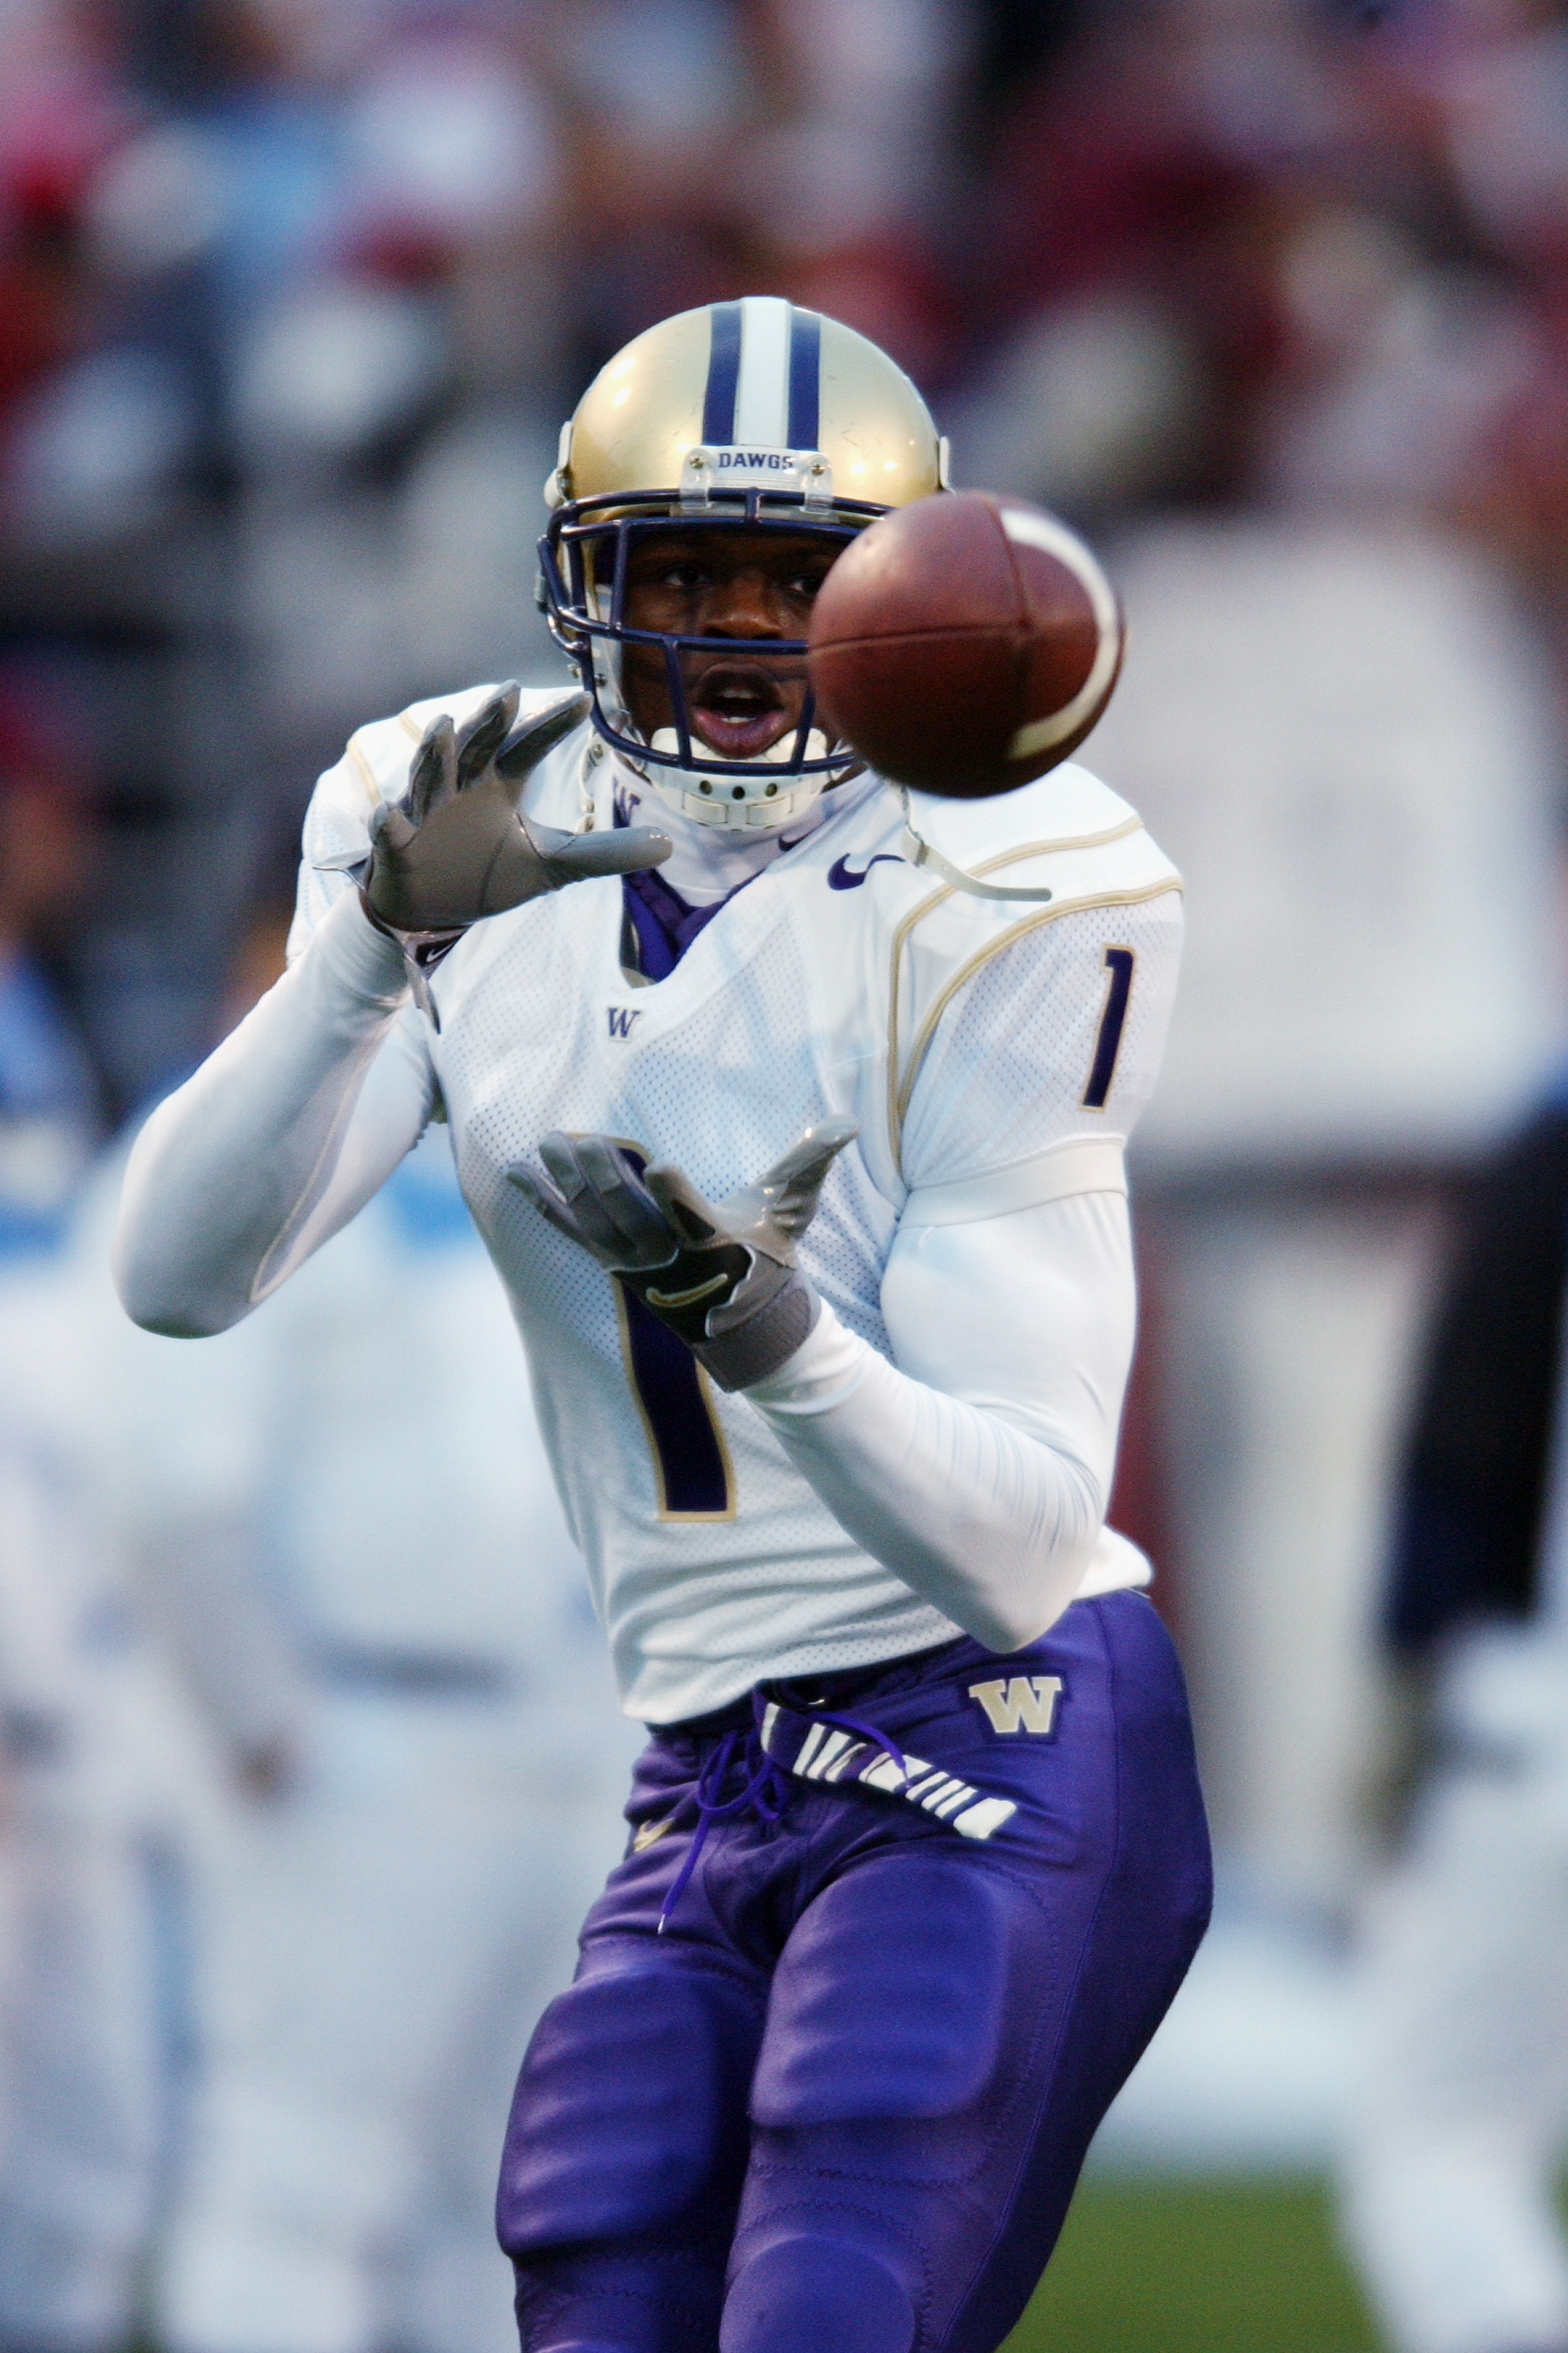 PULLMAN WA - NOVEMBER 23:  Wide receiver Reggie Williams #1 of the University of Washington Huskies prepares to receive the ball during the Pac-10 NCAA game against the Washington State University Cougars at Martin Stadium on November 23, 2002 in Pullman